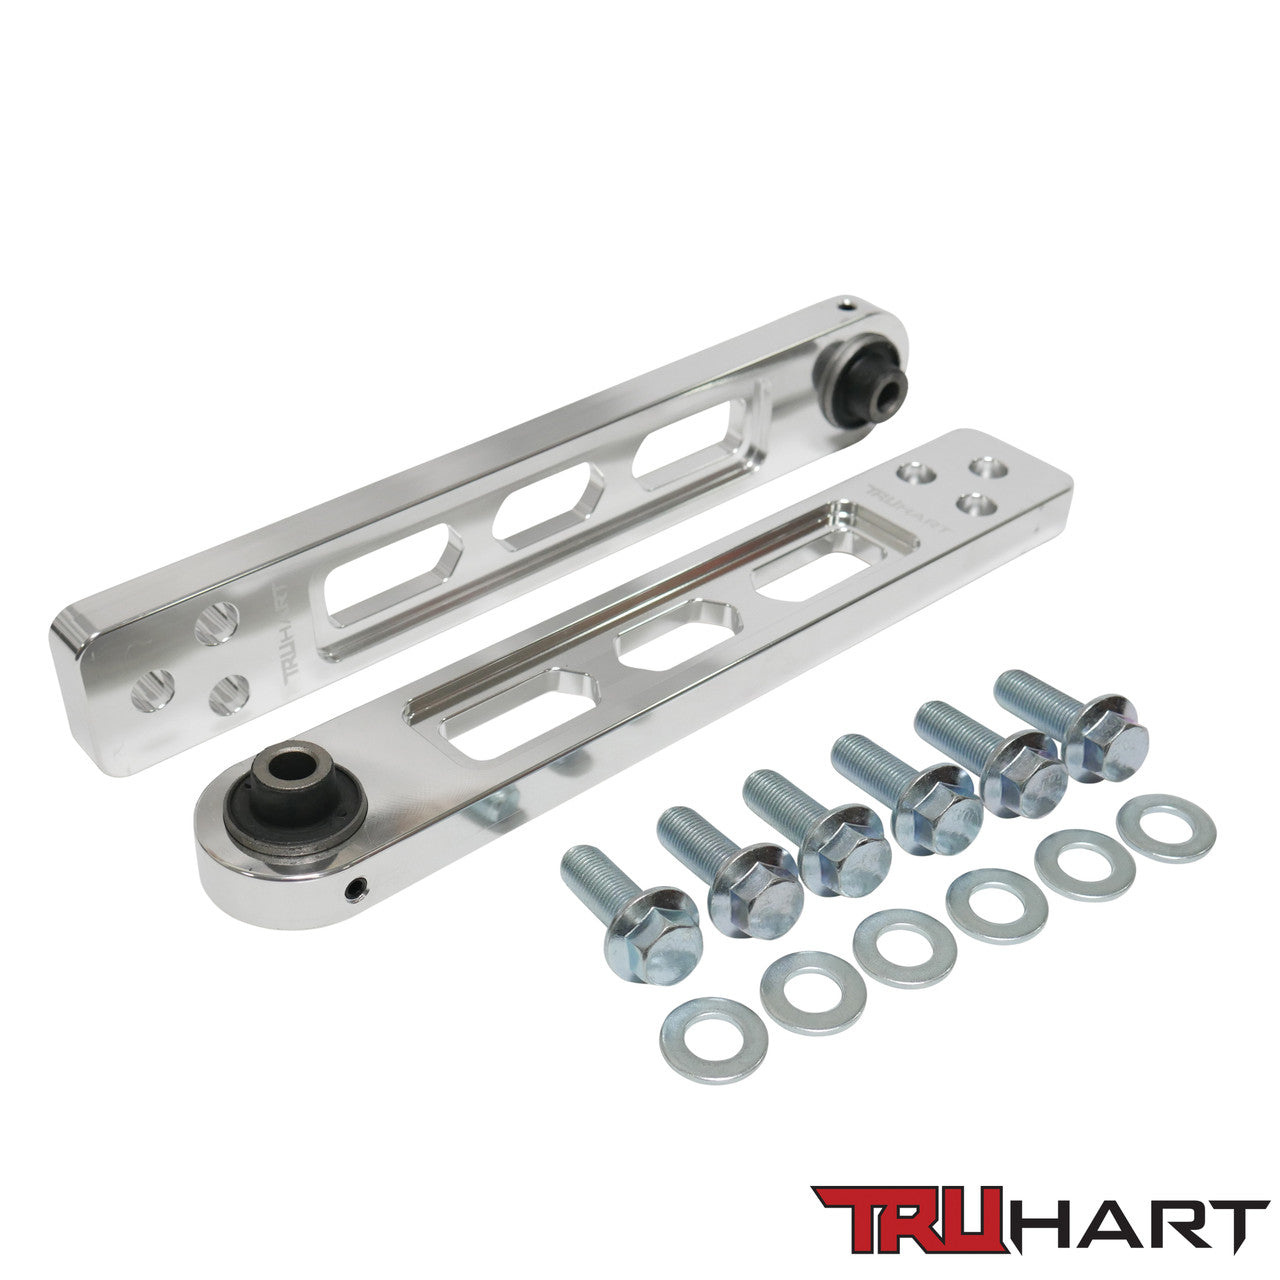 TRUHART REAR LOWER CONTROL ARMS: ACURA/HONDA RSX 96-00 / ELEMENT 03-07